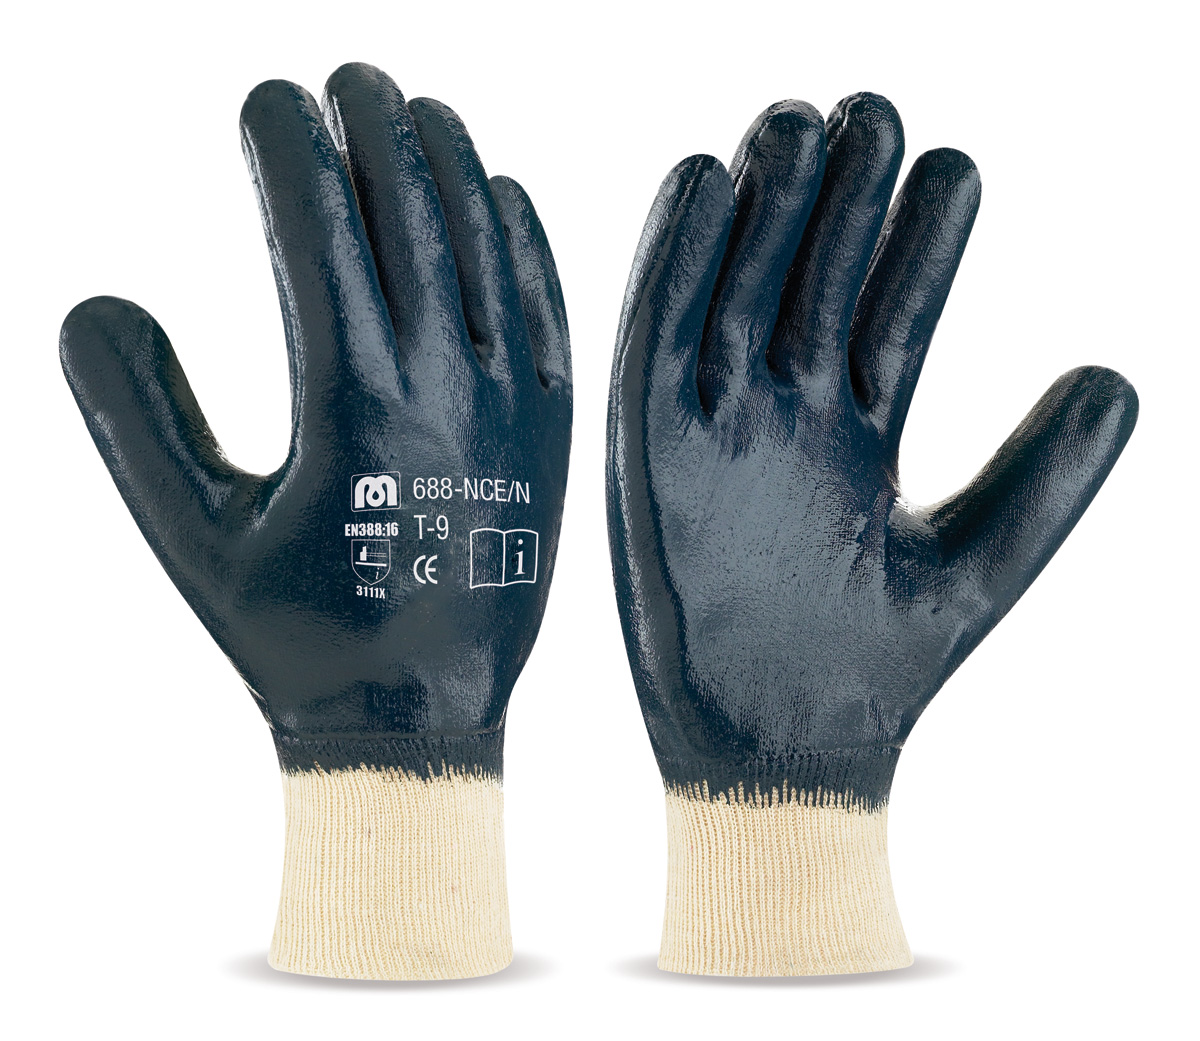 688-NCE/N Work Gloves Nitrile With Support  Covered back. First-class latex glove with knitted cotton support, elastic cuff and inner lining.